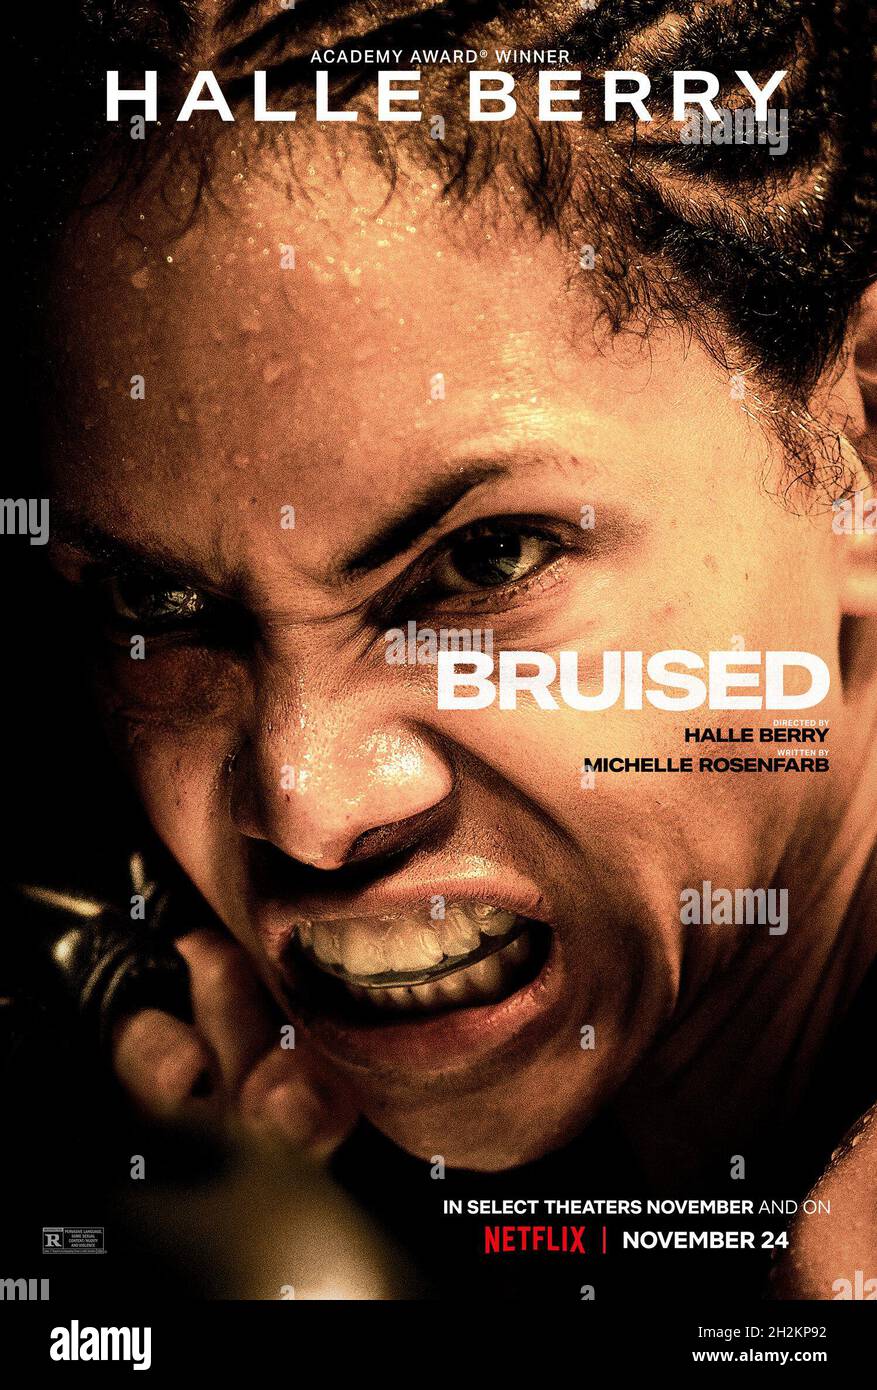 RELEASE DATE: November 24, 2021 TITLE: Bruised STUDIO: Thunder Road Pictures DIRECTOR: Halle Berry PLOT: A disgraced MMA fighter finds redemption in the cage and the courage to face her demons when the son she had given up as an infant unexpectedly reenters her life. STARRING: HALLE BERRY as Jackie Justice poster art. (Credit Image: © Thunder Road Pictures/Entertainment Pictures) Stock Photo